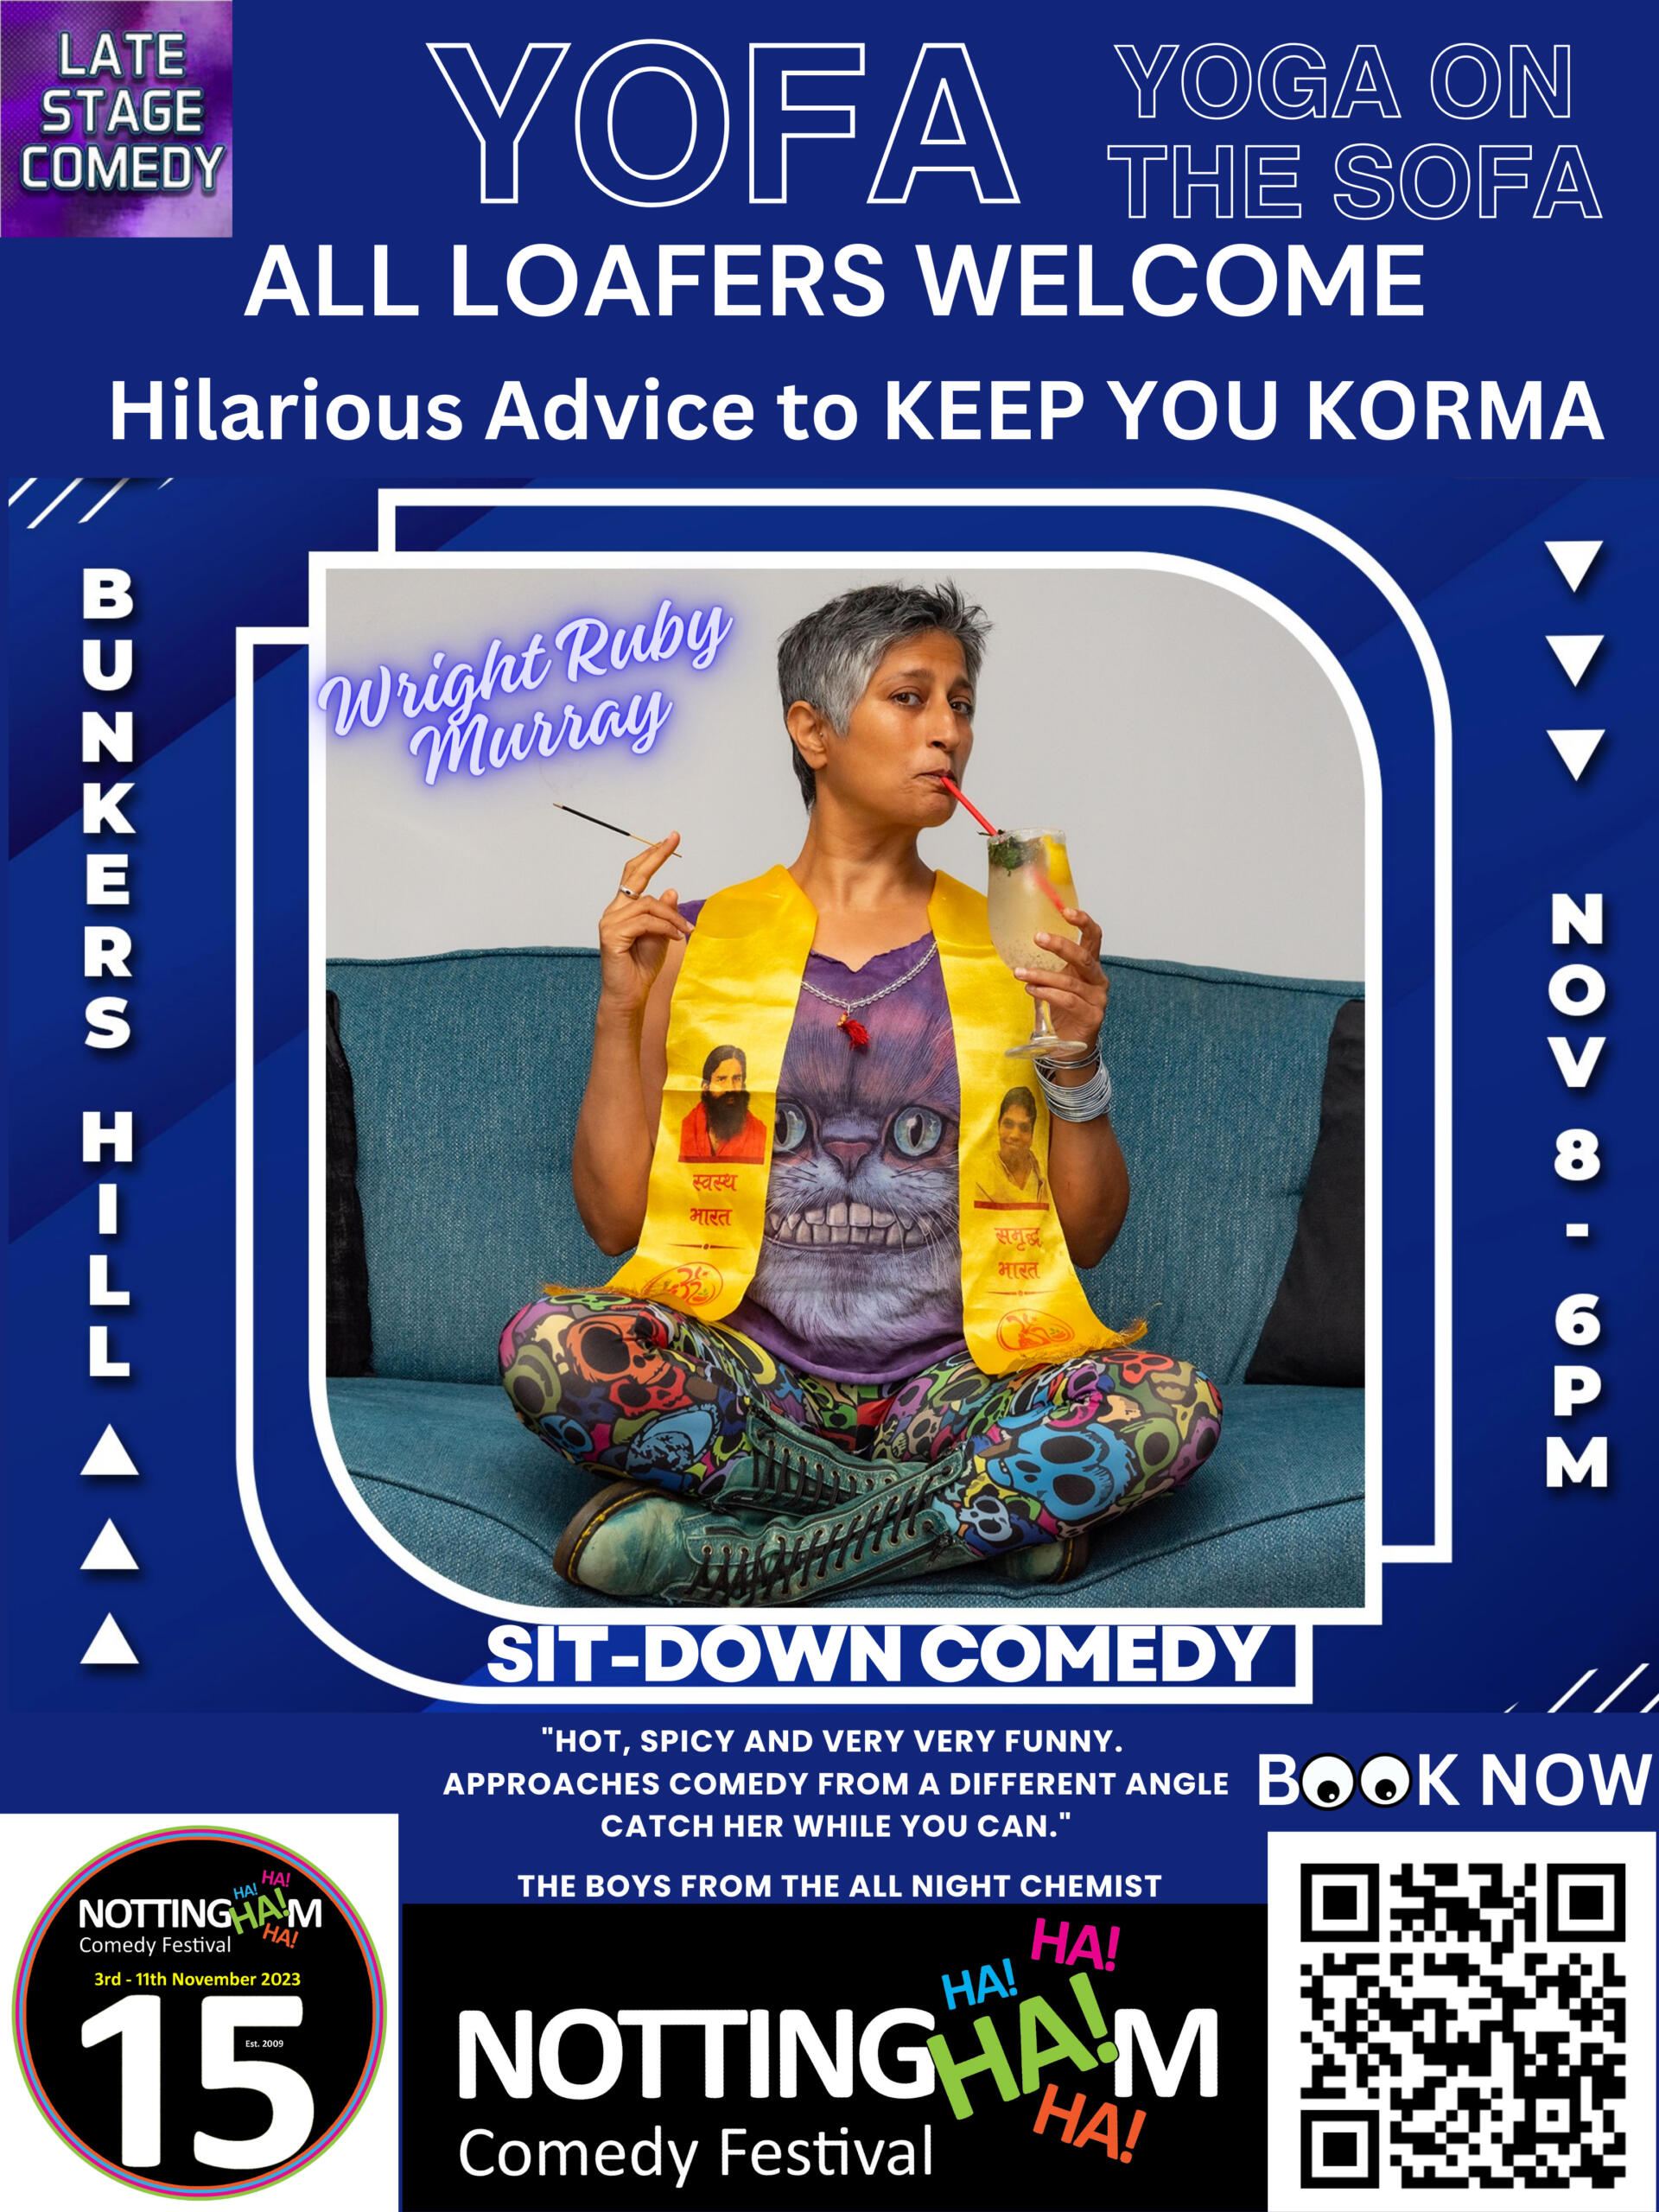 Nilam Wright sat on a sofa with incense stick and drink in hand) Promoting Yofa (yoga on the sofa) comedy show at the Nottingham comedy festival 8 Nov 2023 at Bunkers Hill in Nottingham